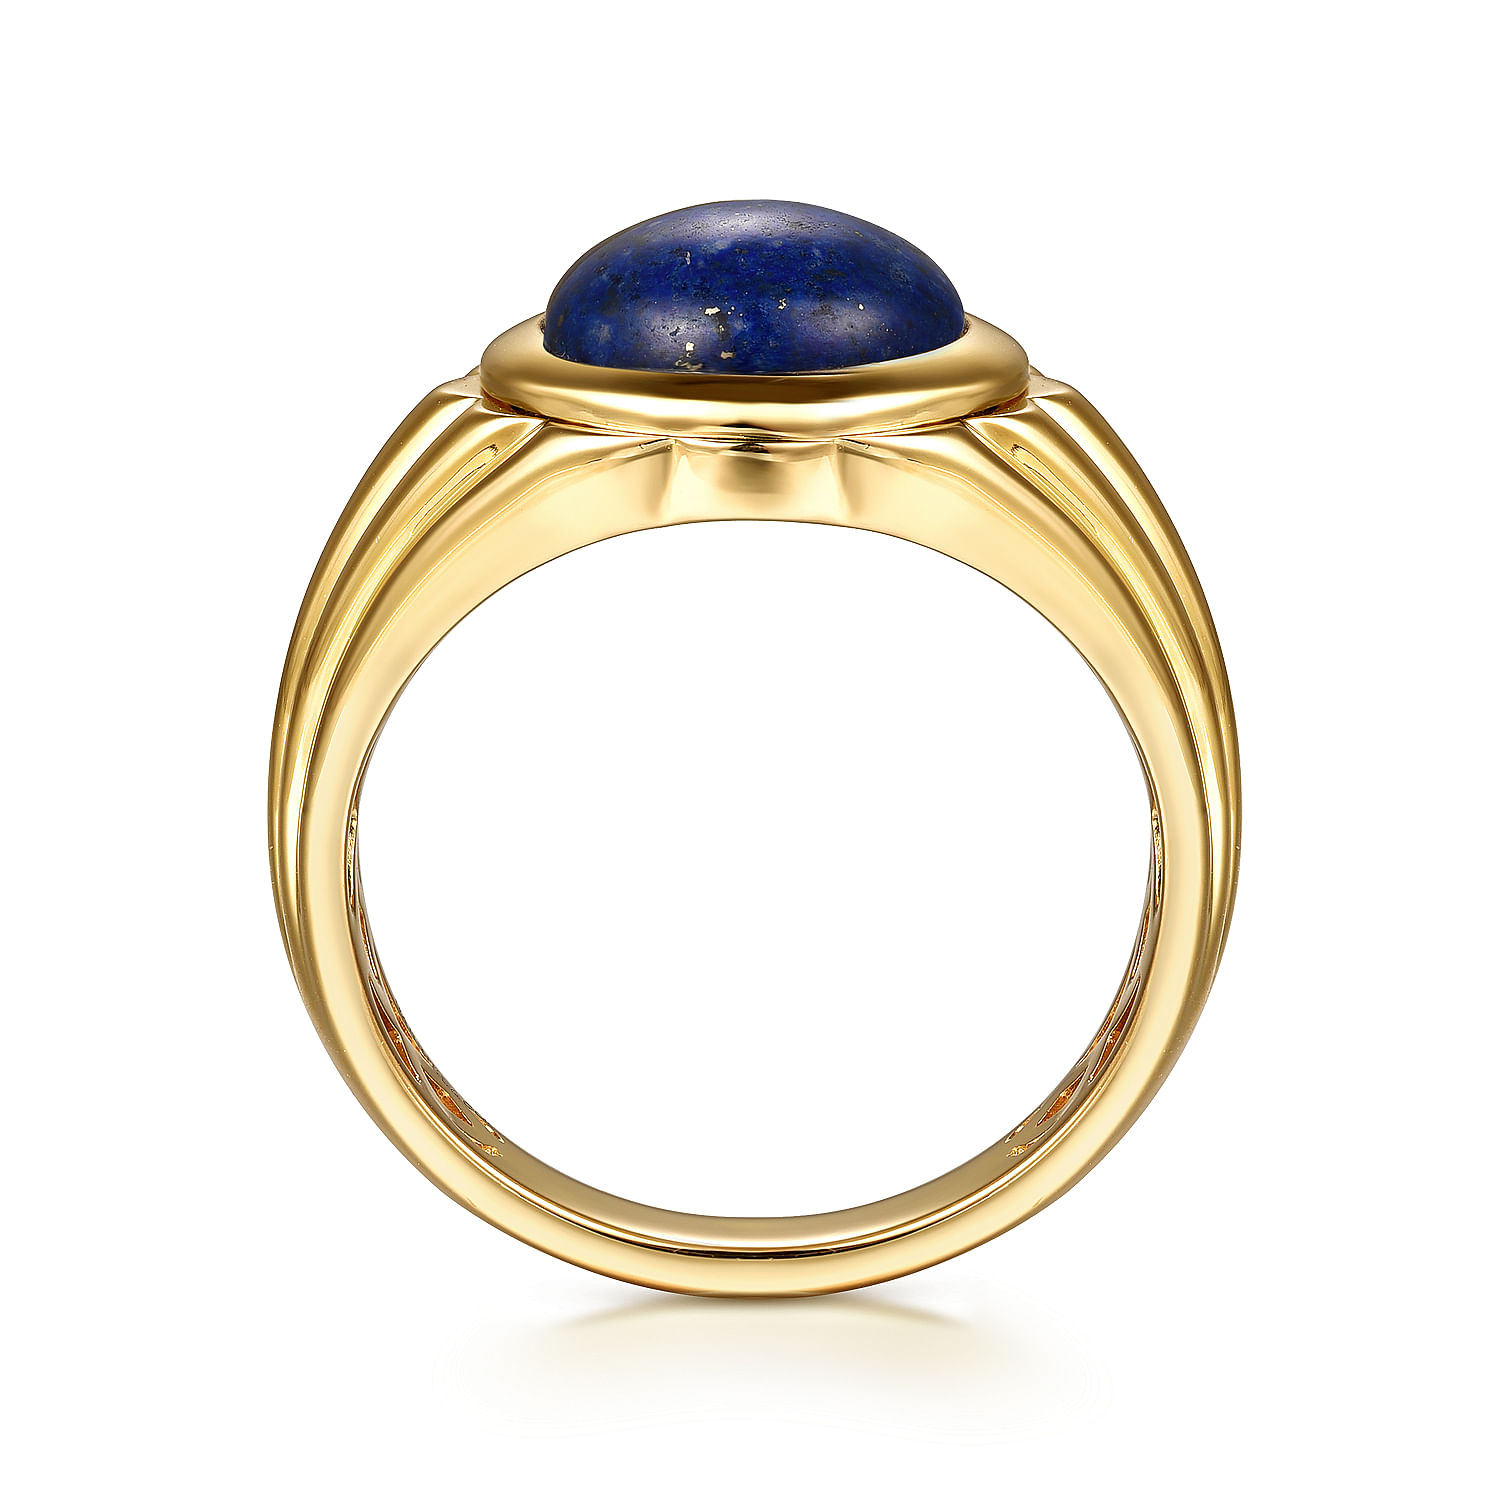 Wide 14K Yellow Gold Lapis Mens Ring in High Polished Finish